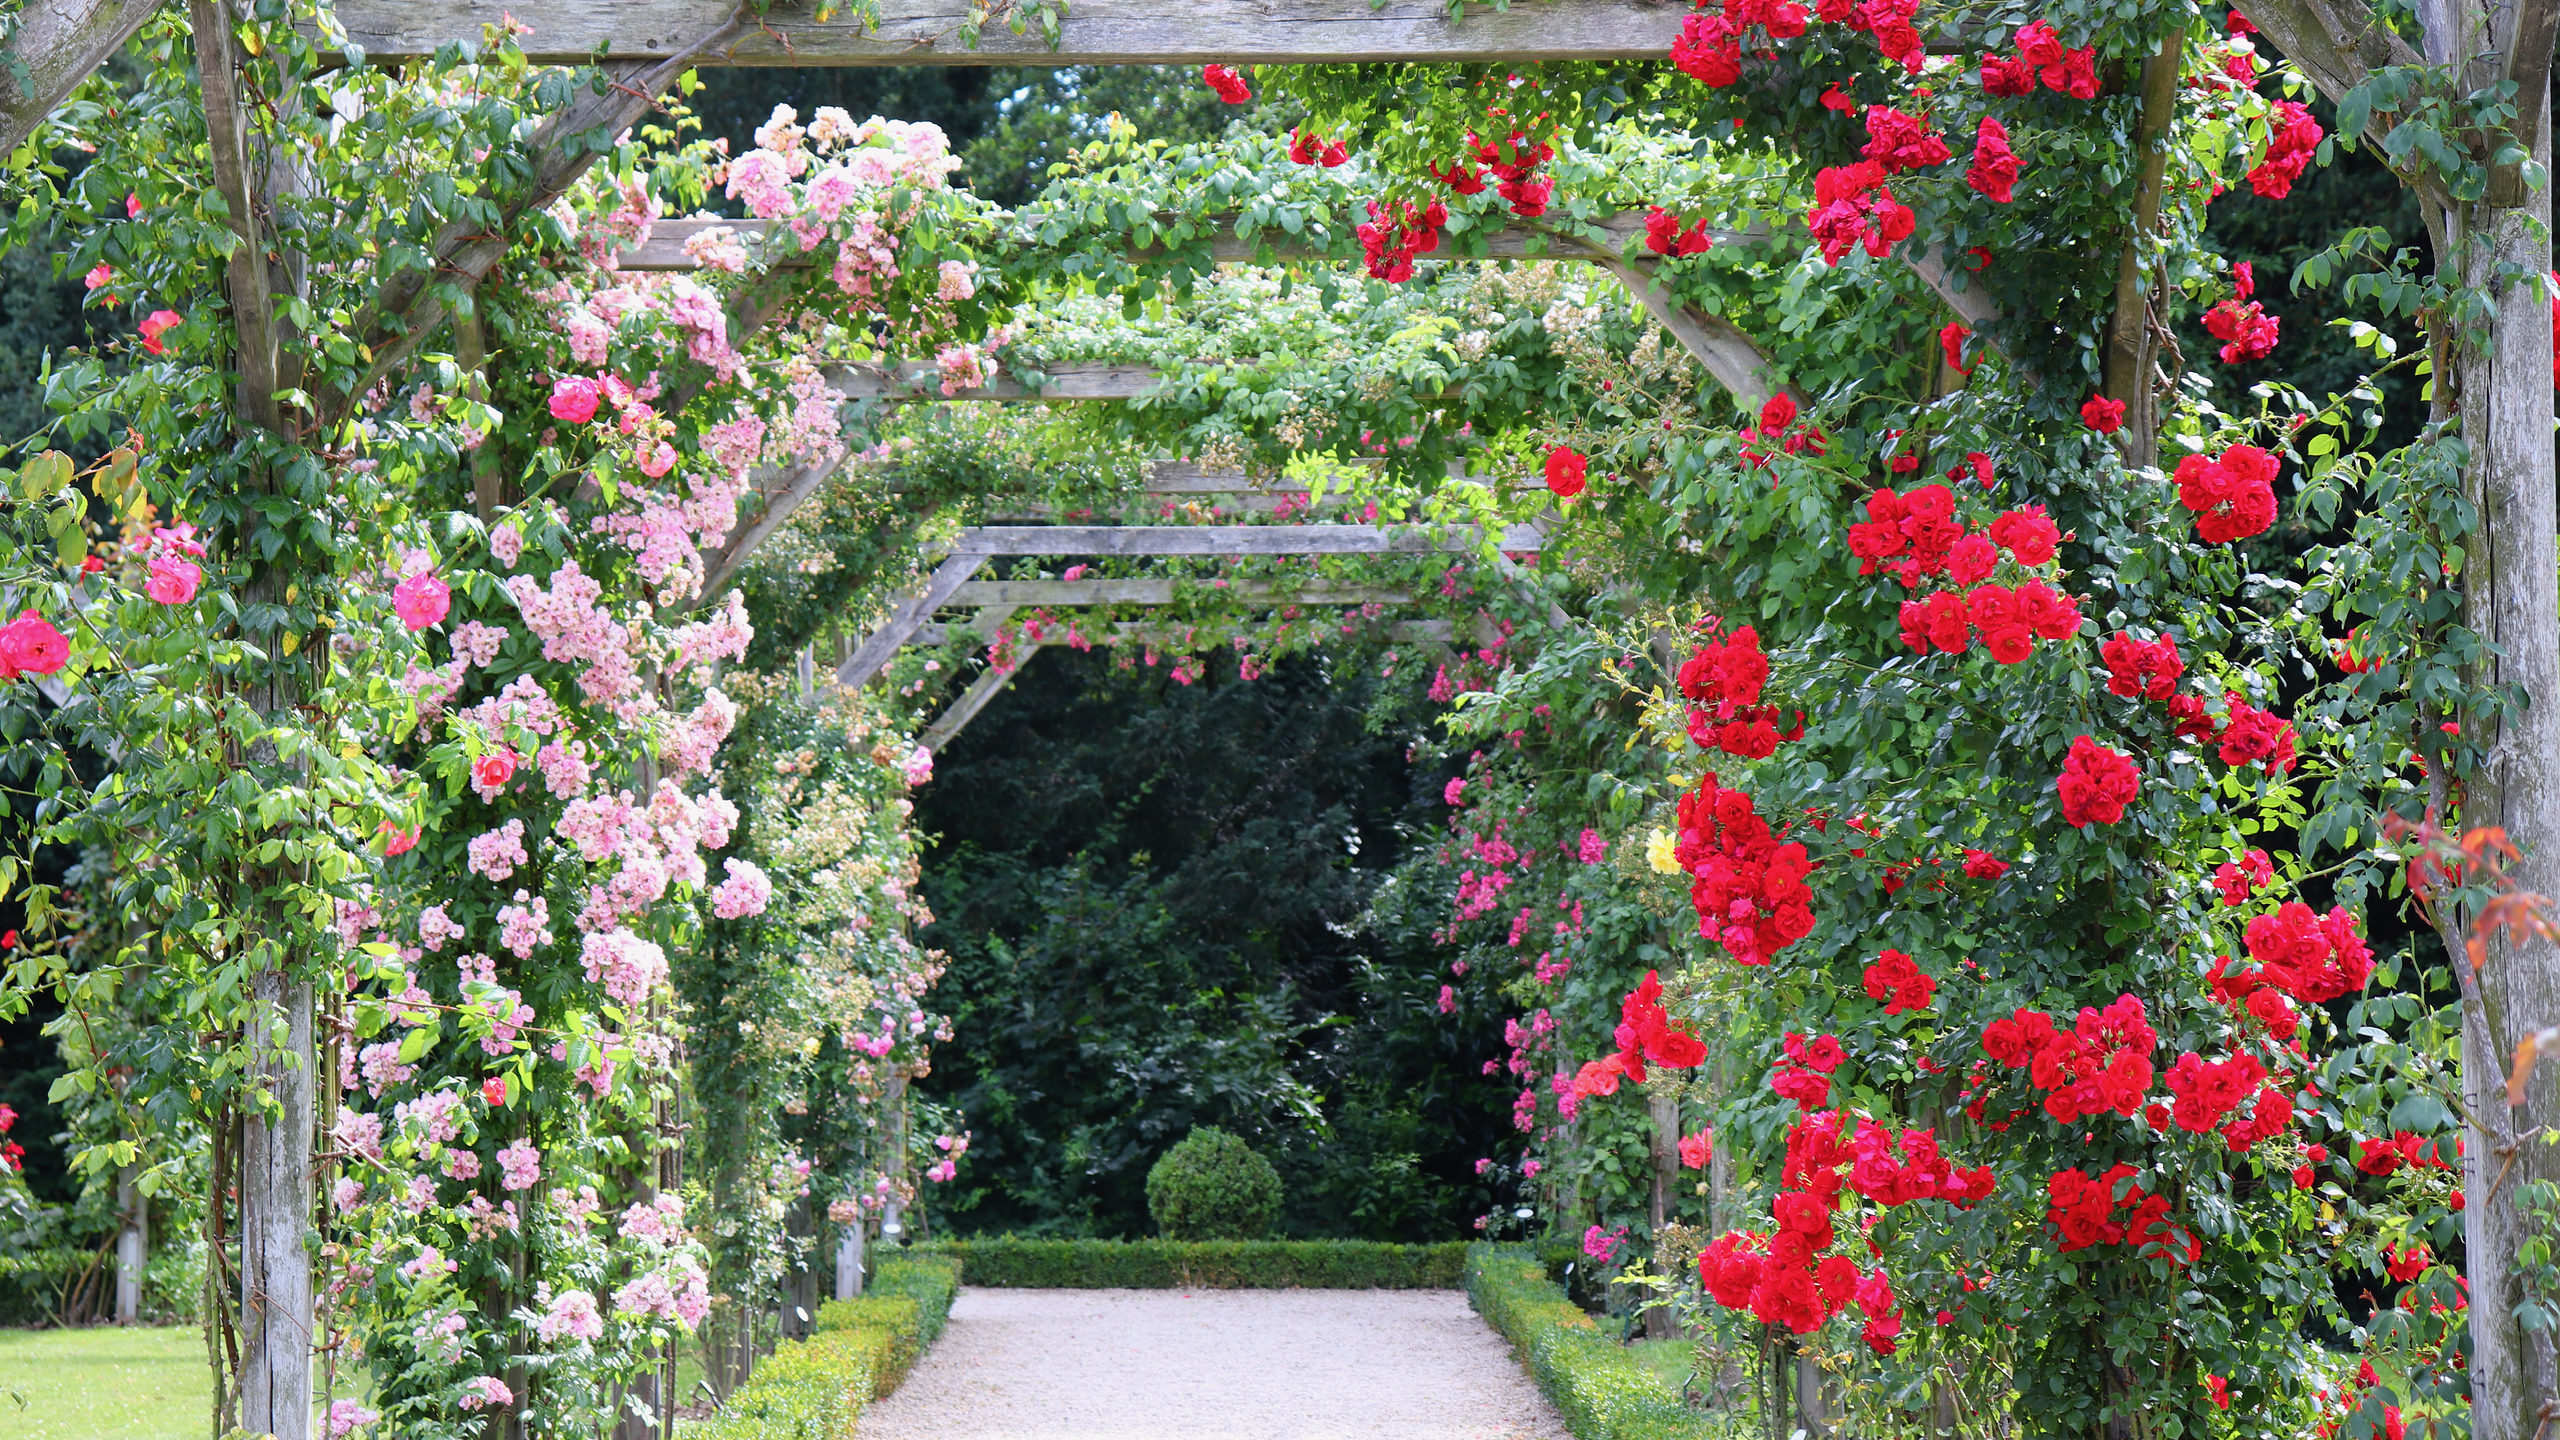 Pink and red climbing rose varieties covering a walkway of trellises